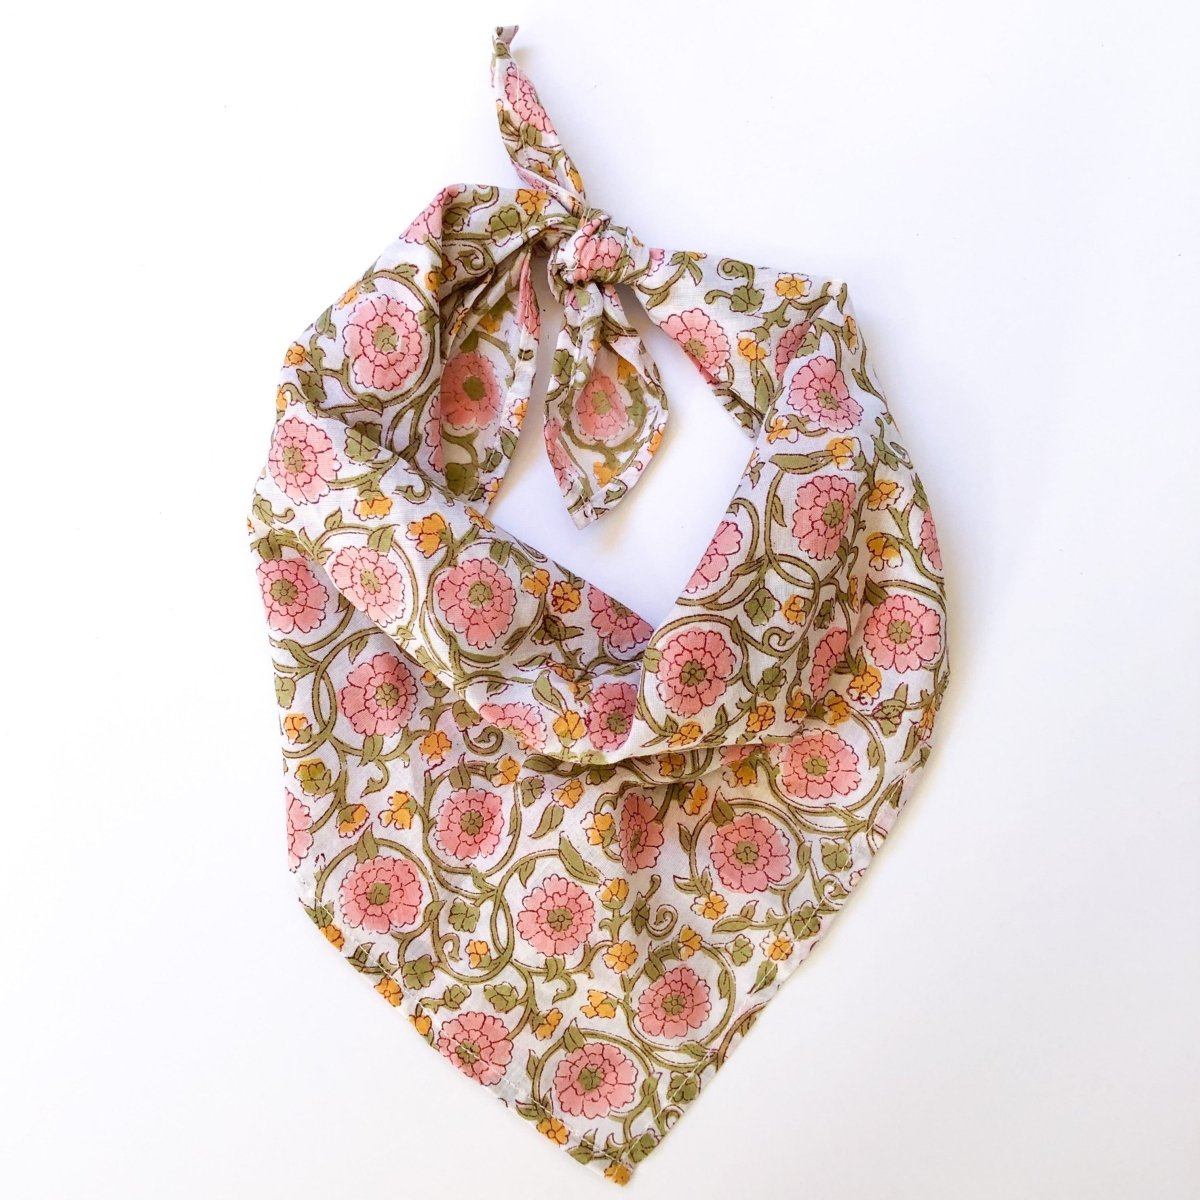 A pink, yellow, white and green floral patterned bandana, folded over and tied in a knot. Block printed by hand, the Flora Bandana from Maelu is designed in Portland, Oregon and handmade in India.